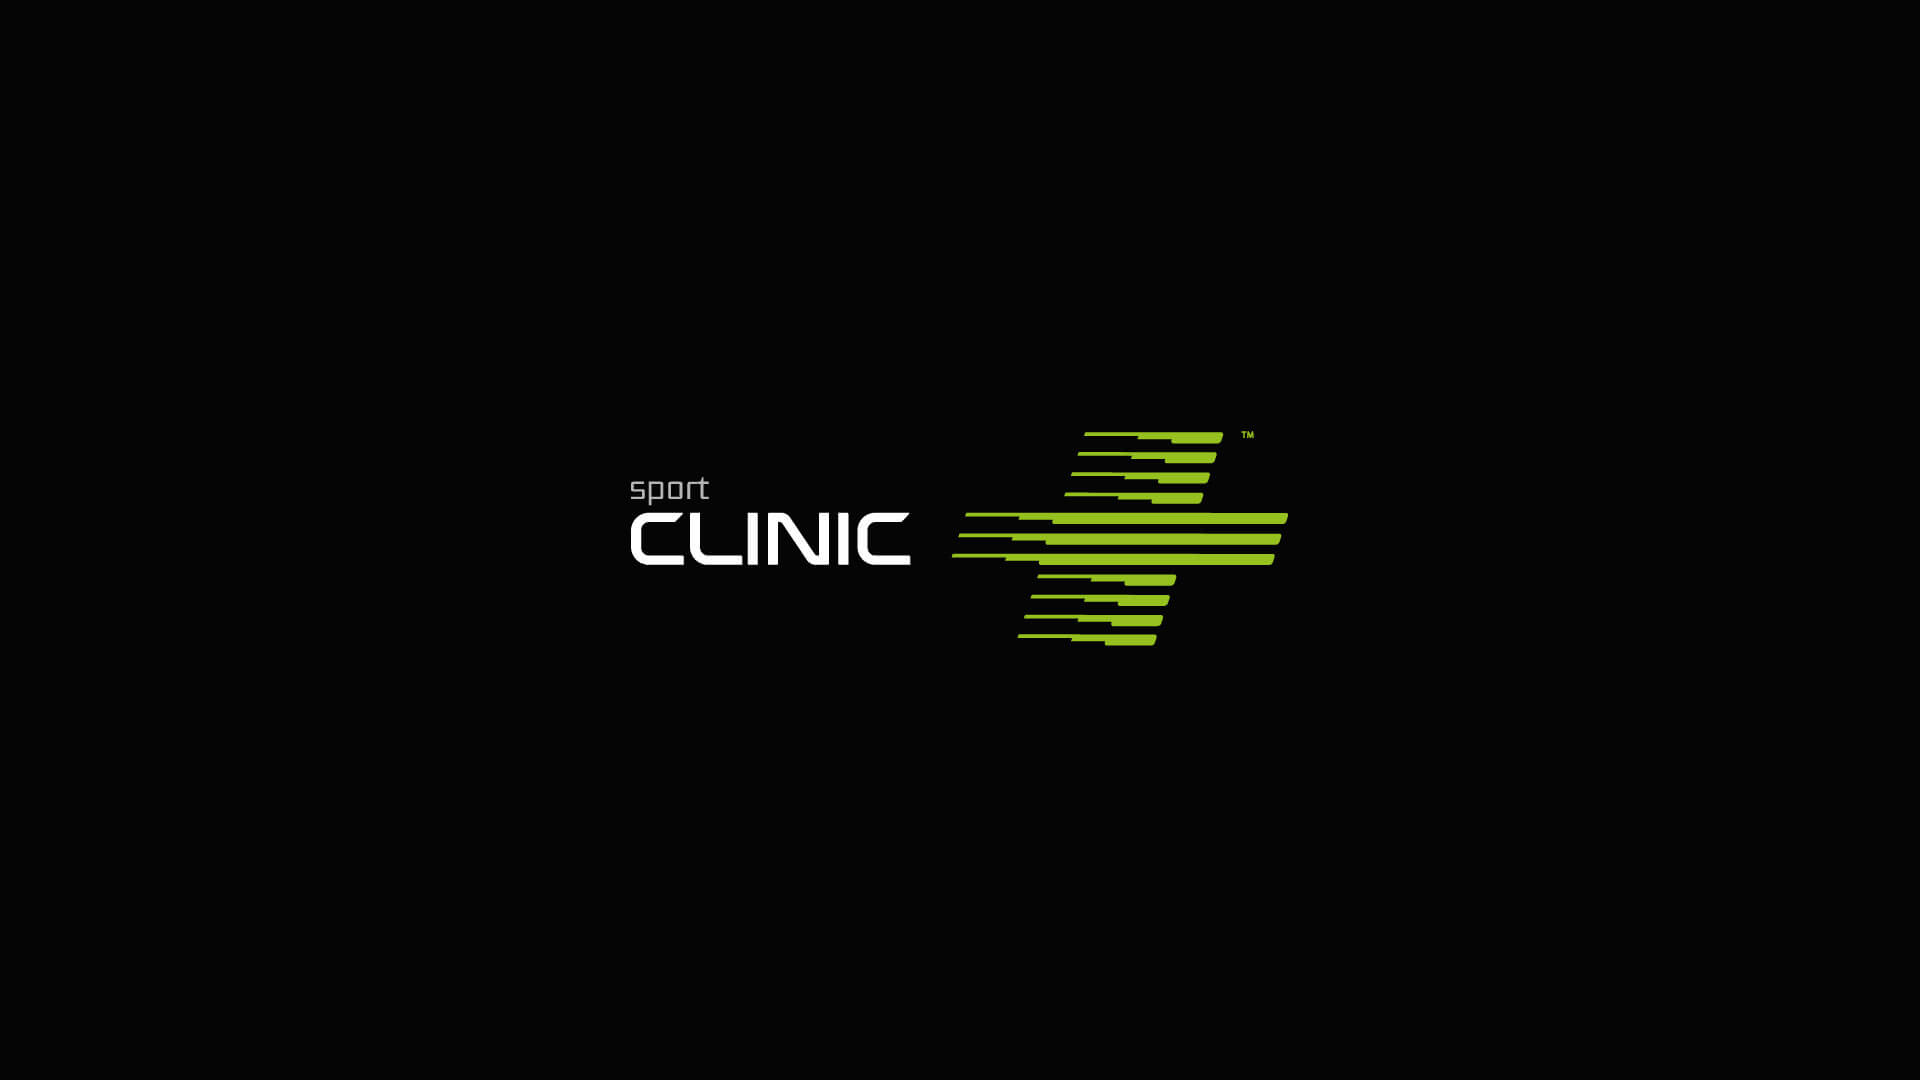 Clinic_layout_02